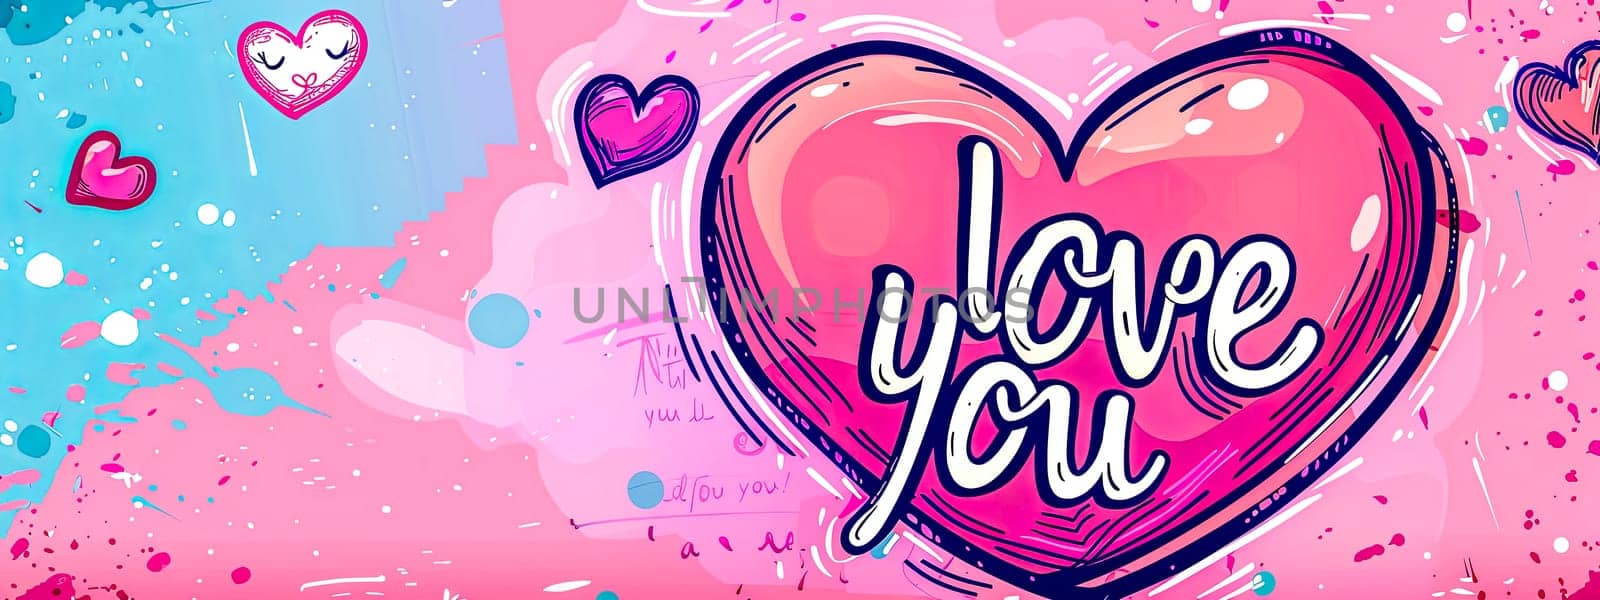 Colorful pop art style love you heart illustration on a pink abstract background